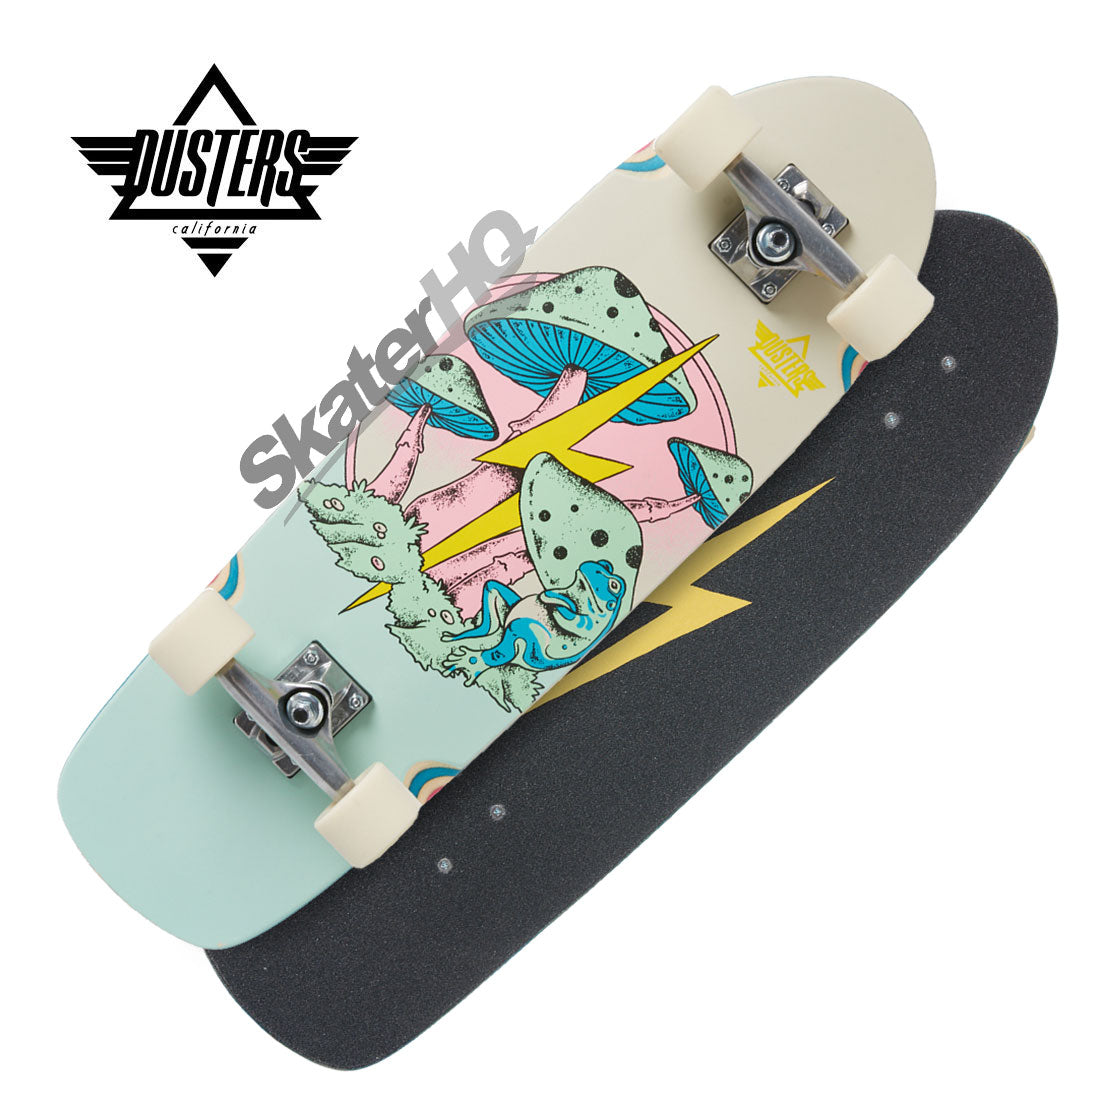 Dusters Fungi 29.5 Cruiser Complete - Pink/Green Skateboard Compl Cruisers